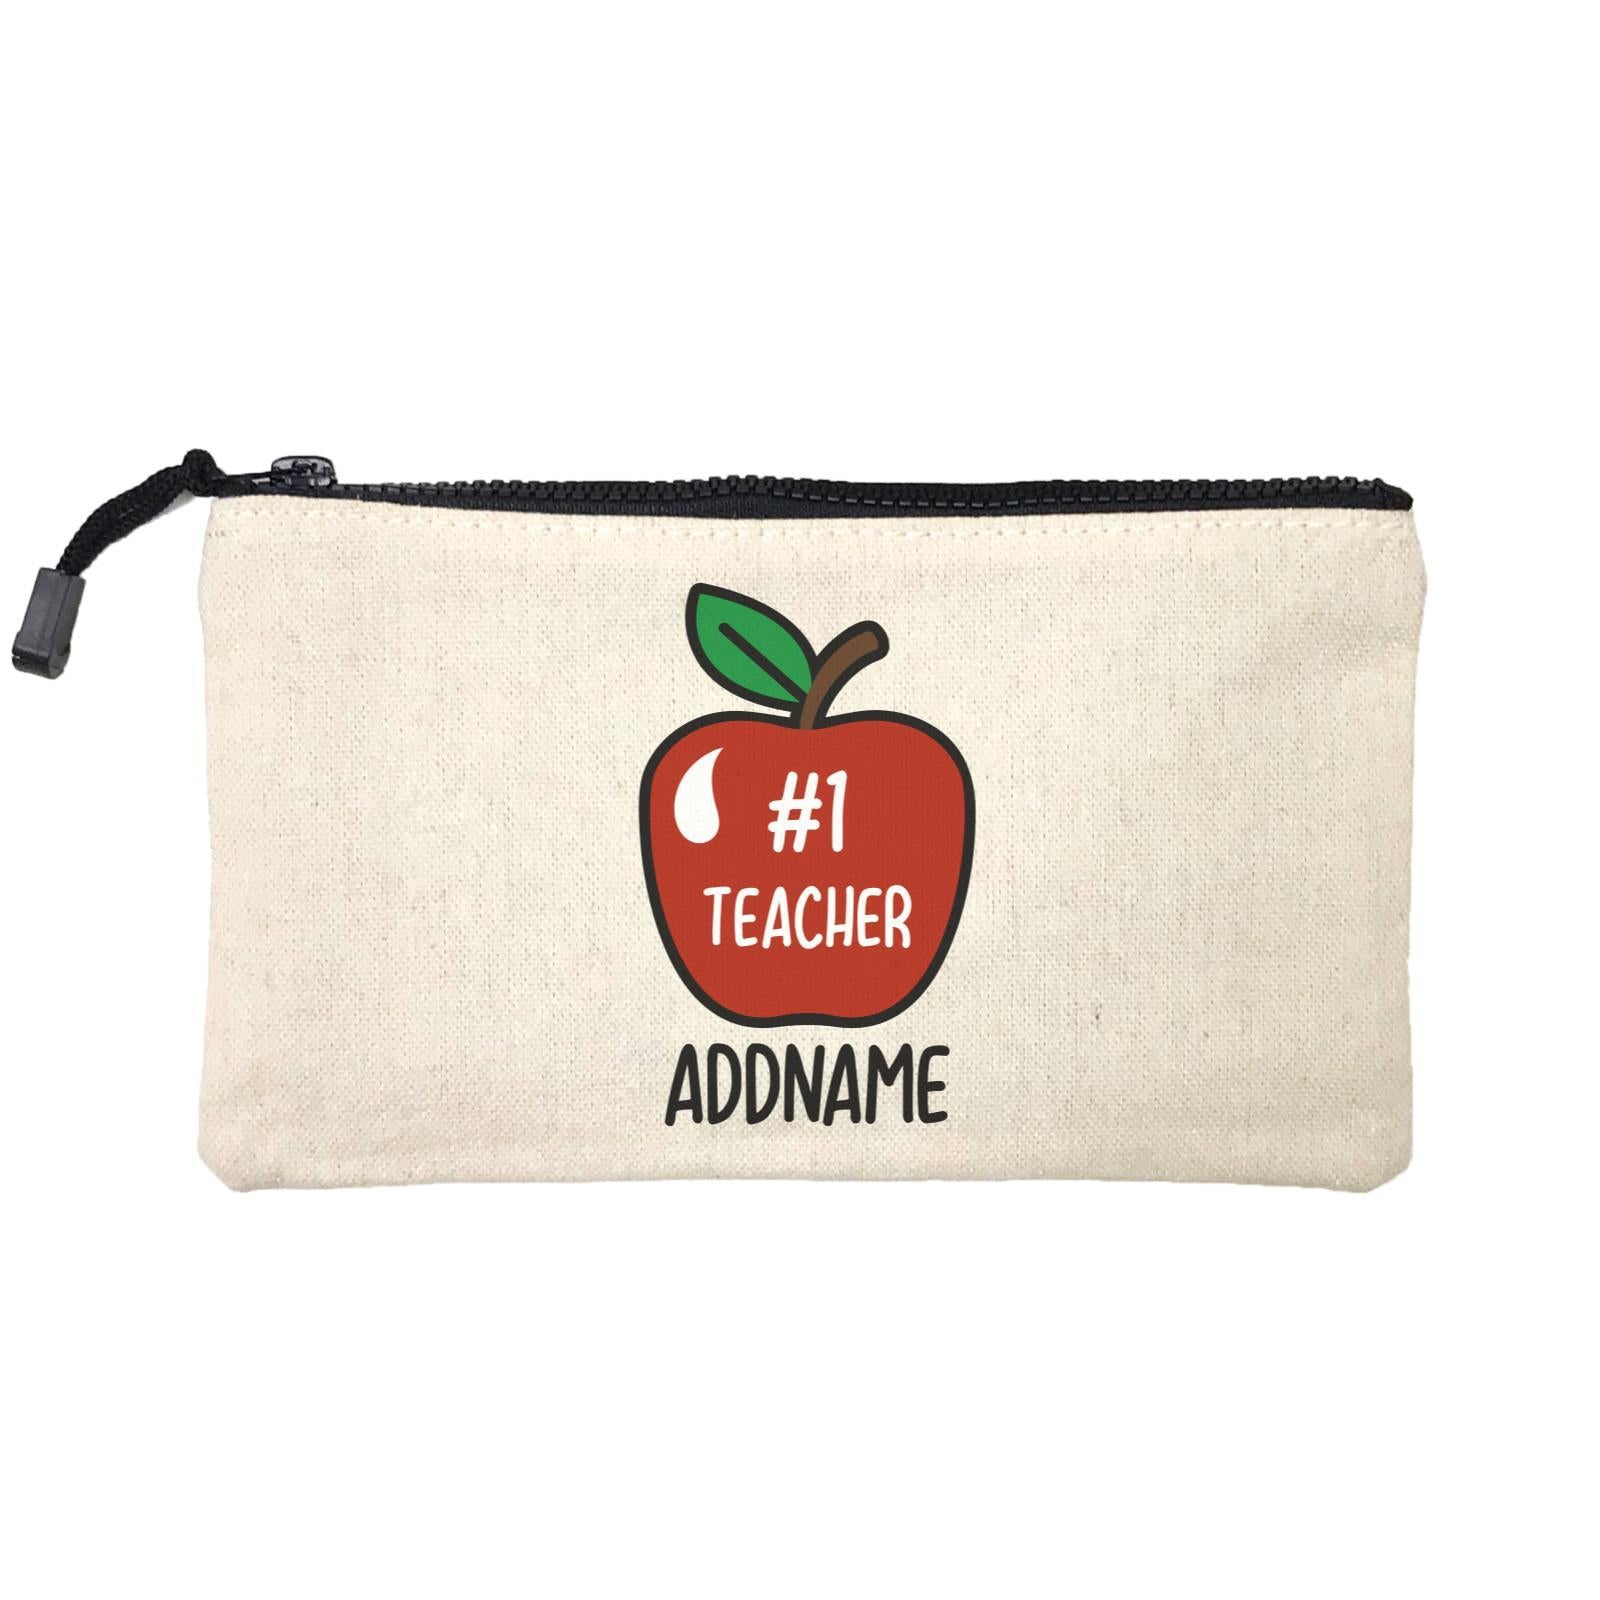 Teacher Addname Big Red Apple Hashtag 1 Teacher Addname Mini Accessories Stationery Pouch